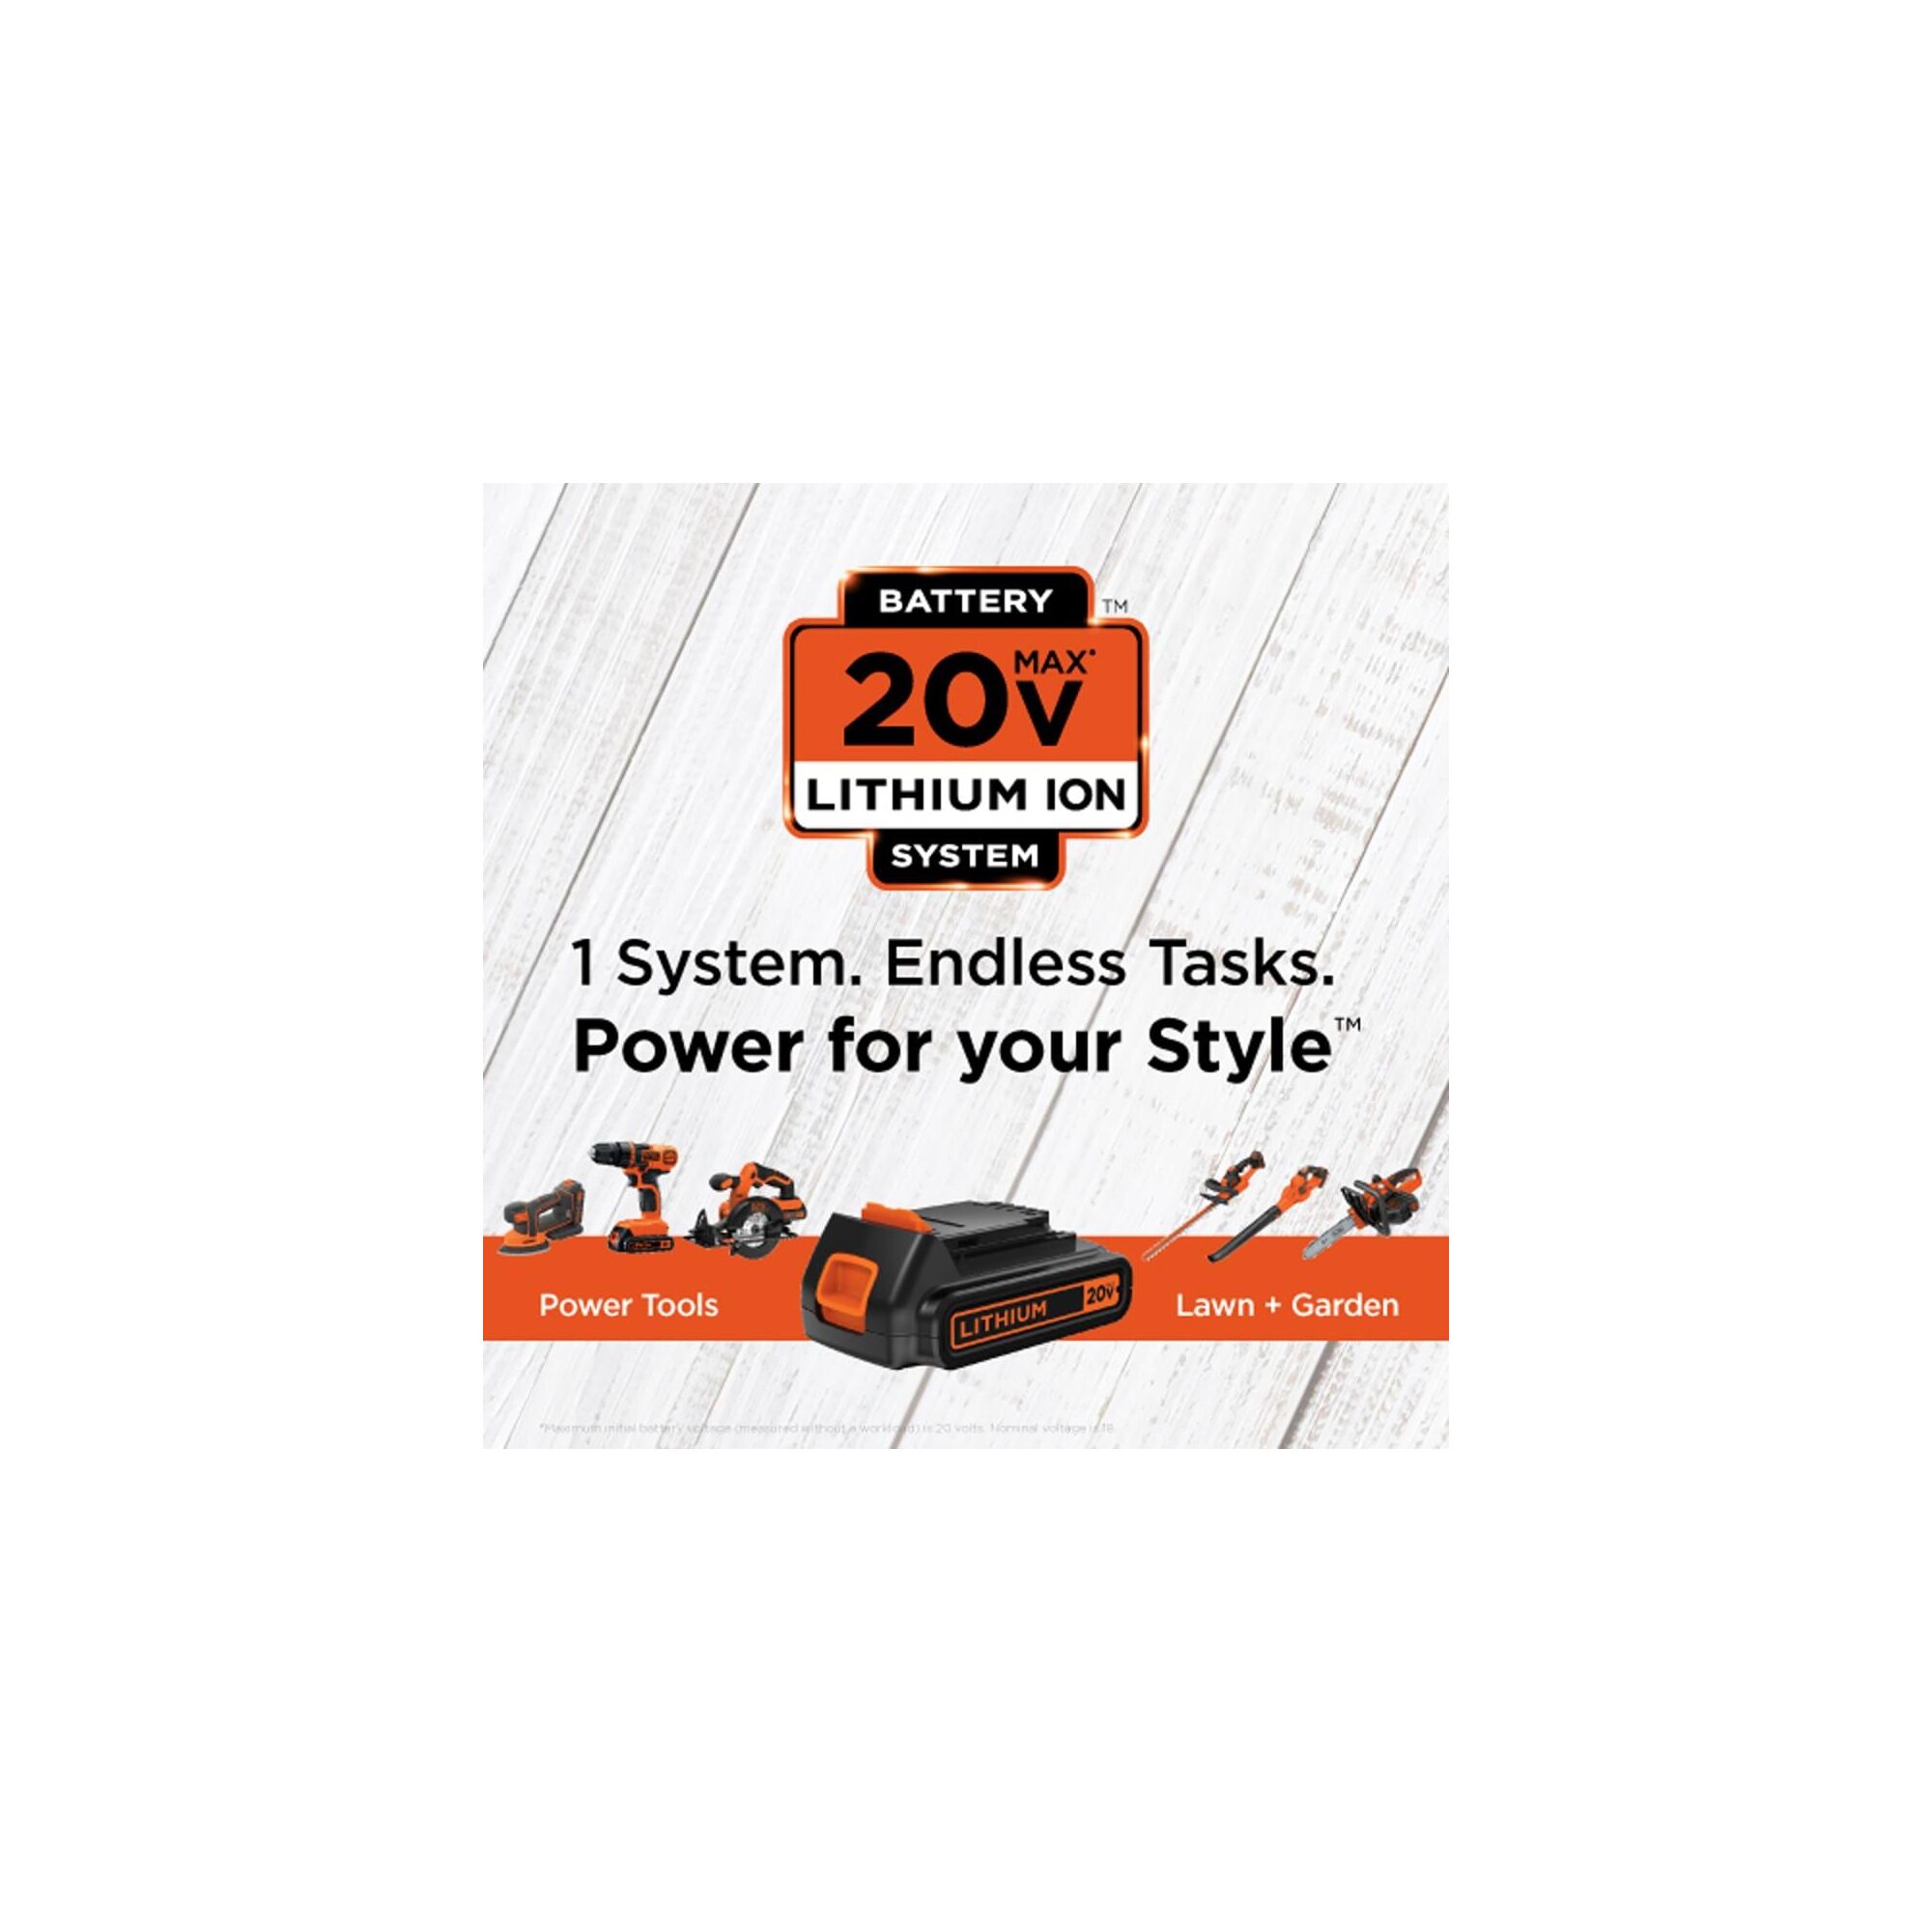 BLACK and DECKER 20 volt lithium battery system message saying 